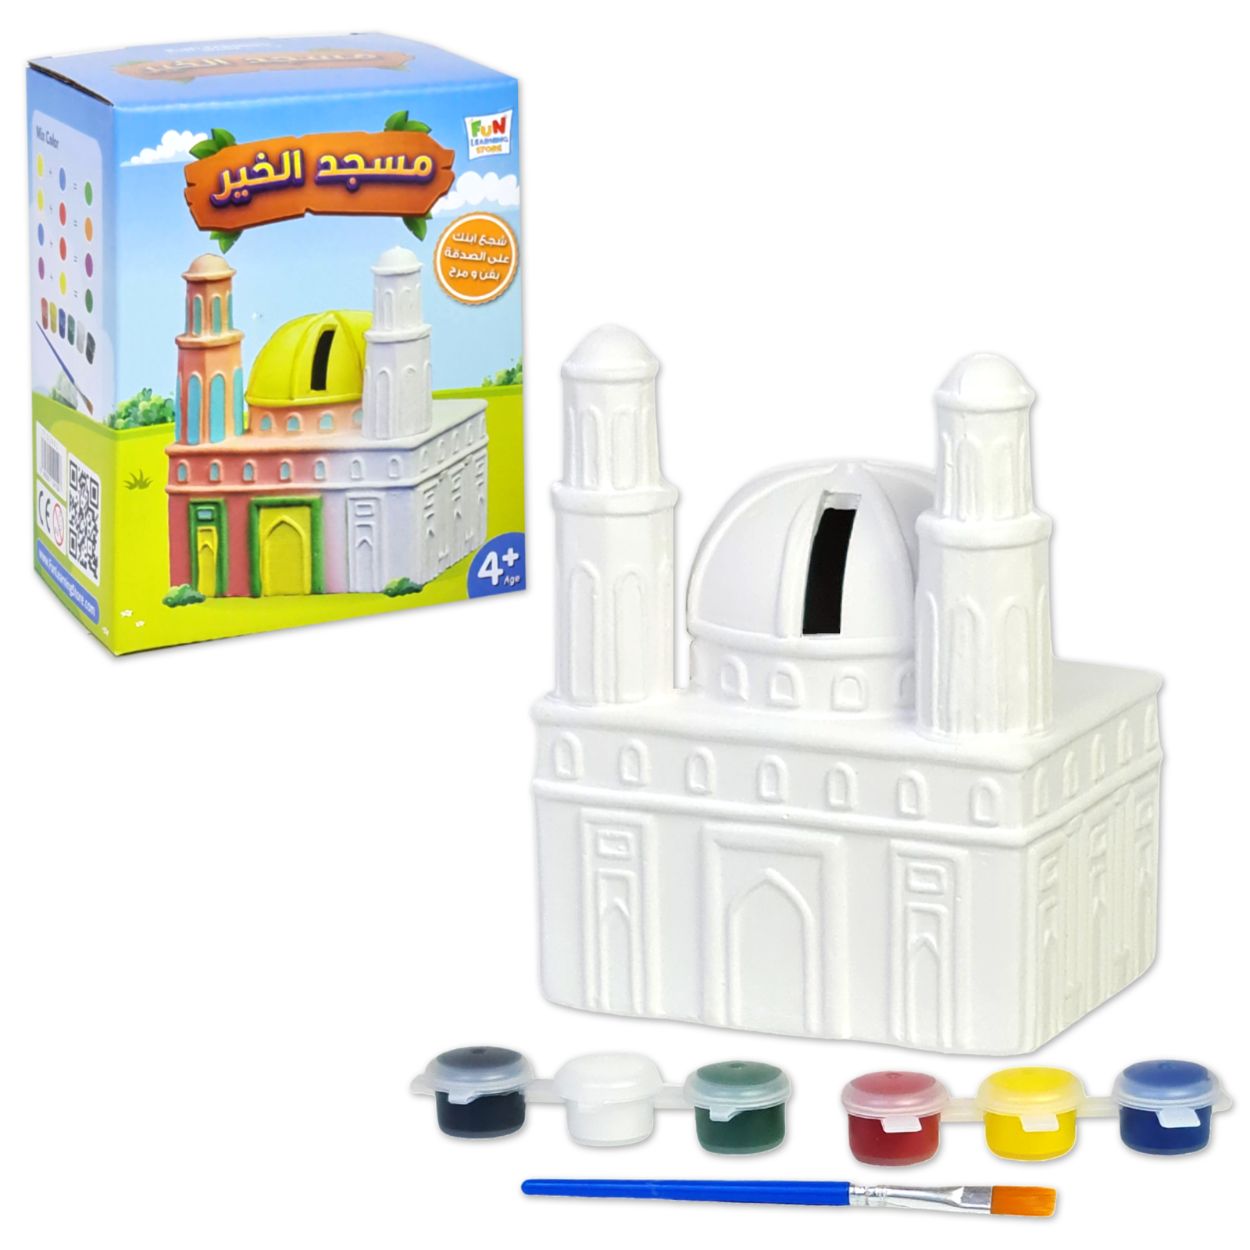 Ceramic Mosque Coin Bank for Kids - Encourage Charity & Creativity